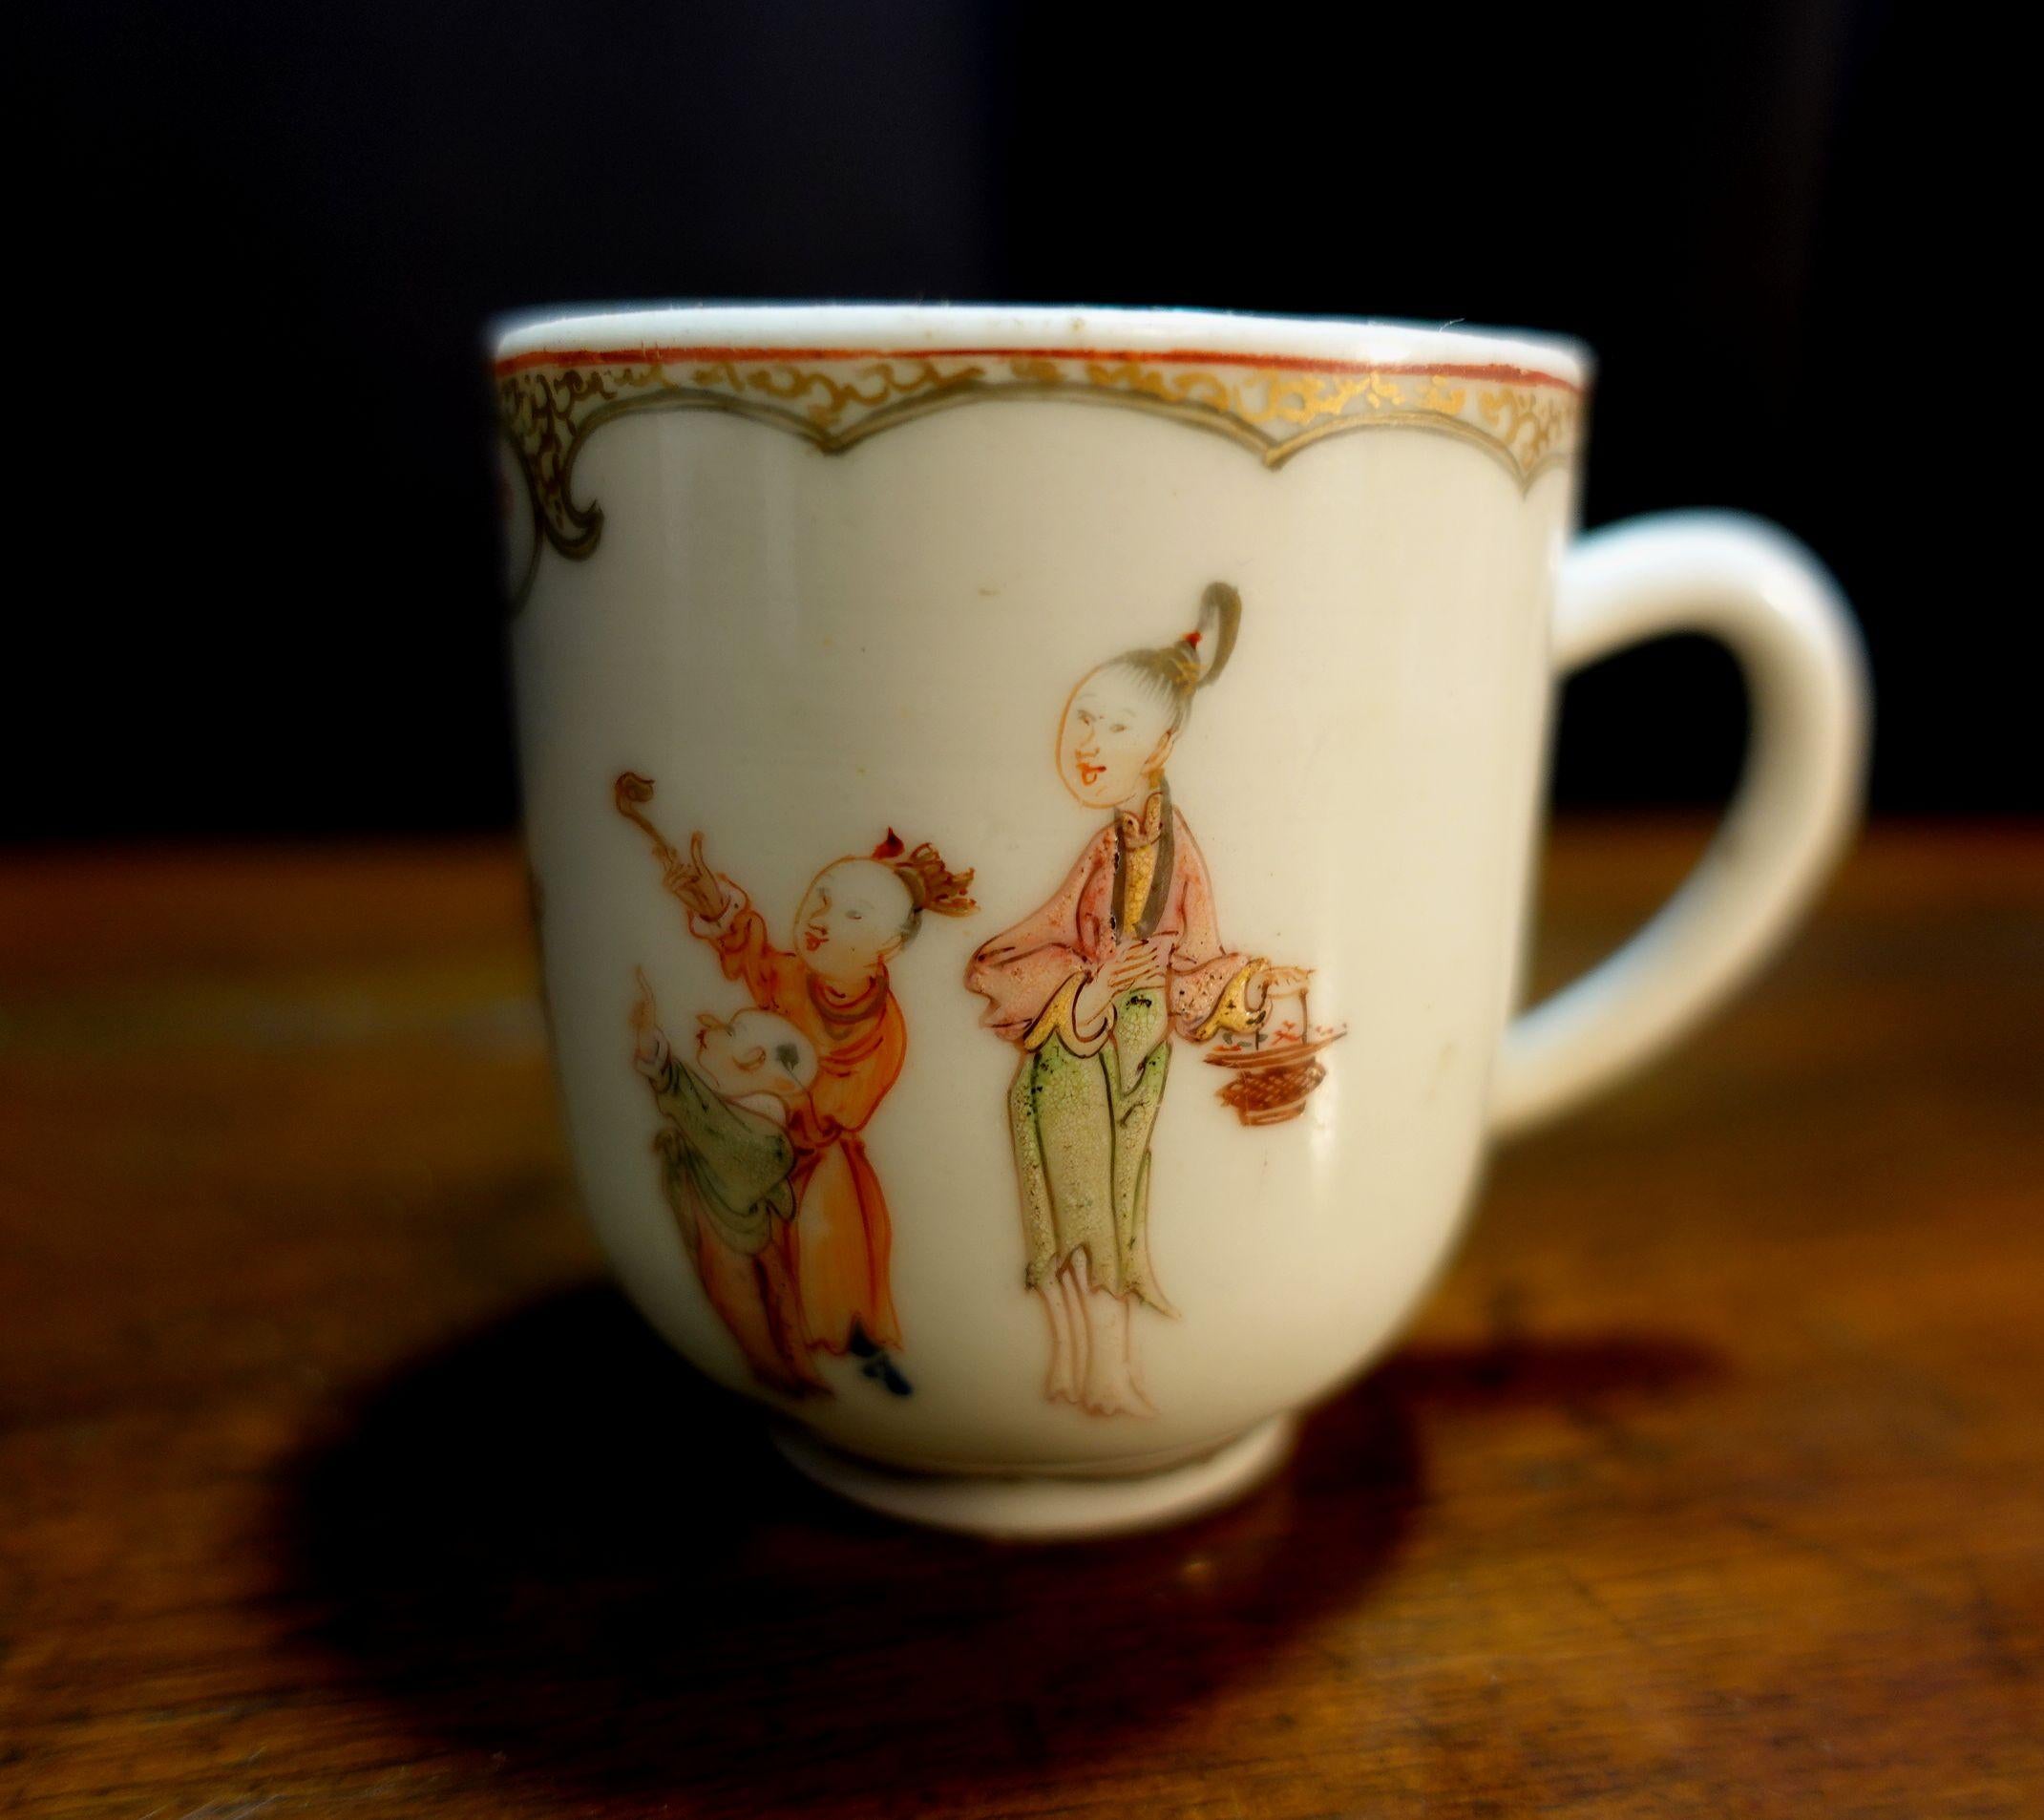 Antique cup from 18th century China. A supper and rear antique from the Qianglong period.
Measures: height is 2 1/2